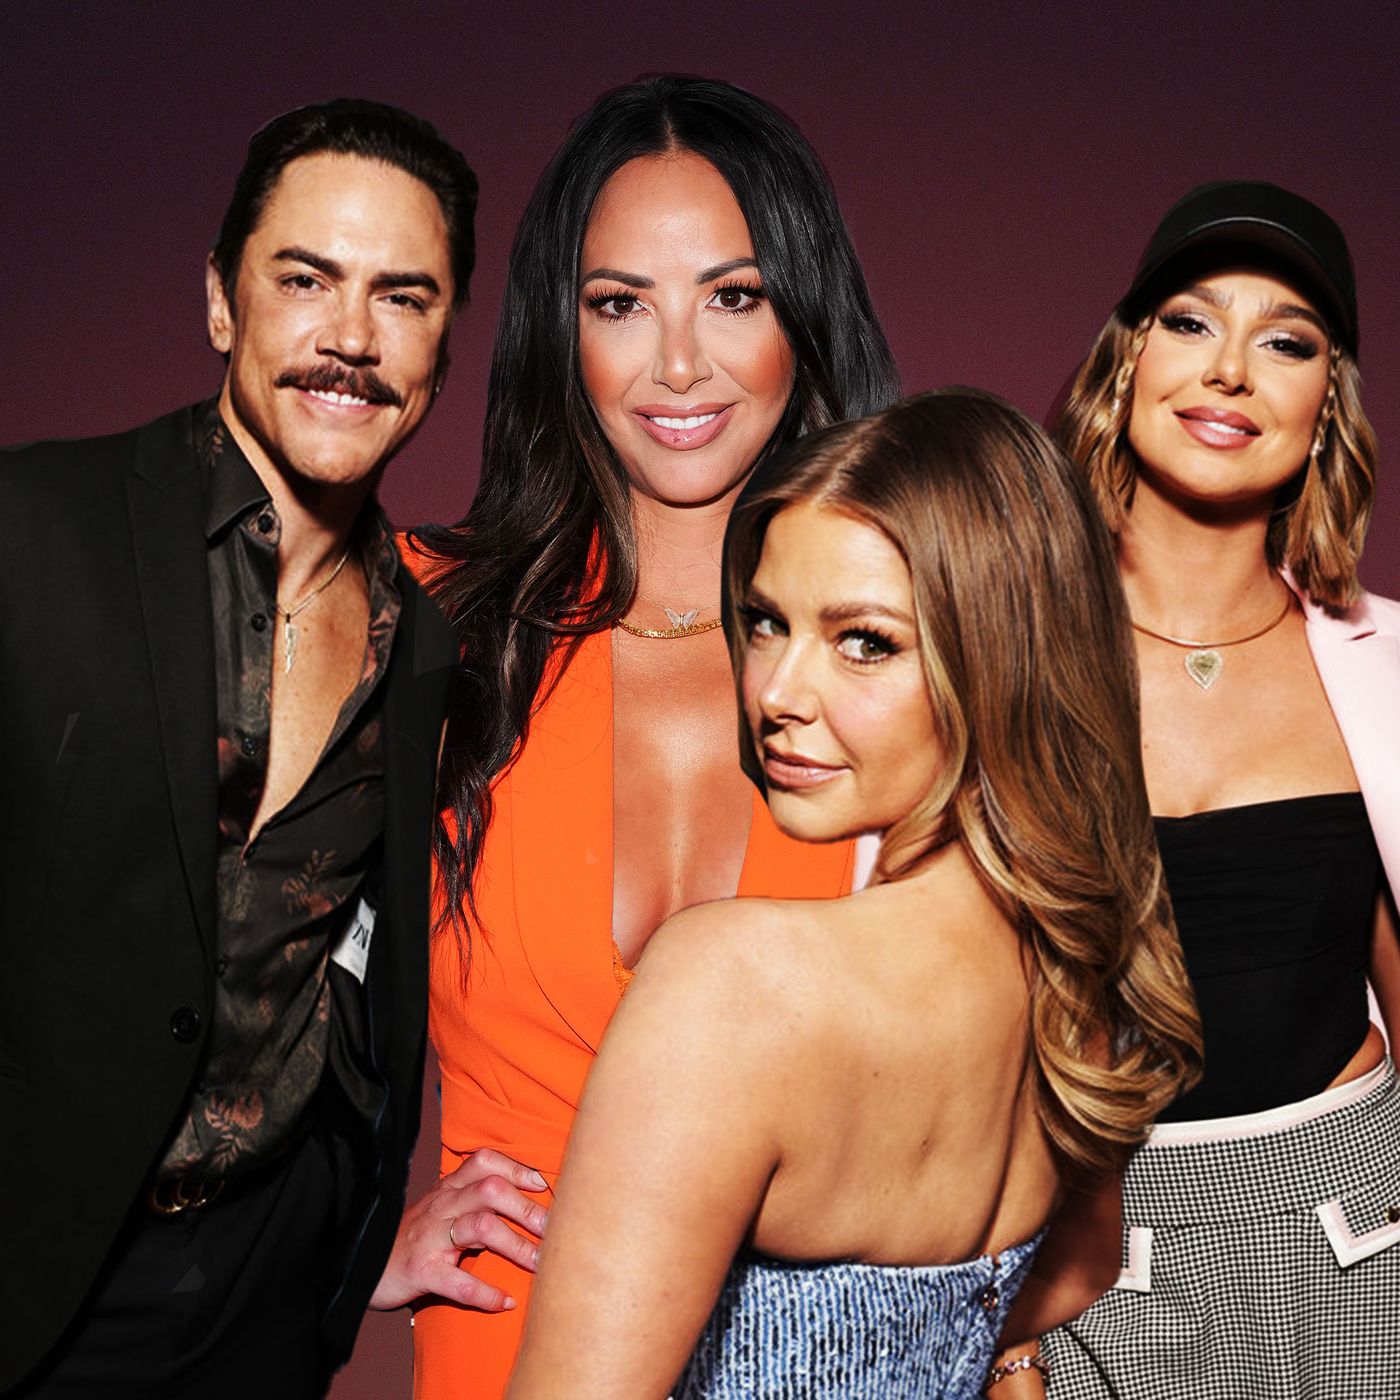 10 Vanderpump Rules Episodes to Watch Before the Reunion